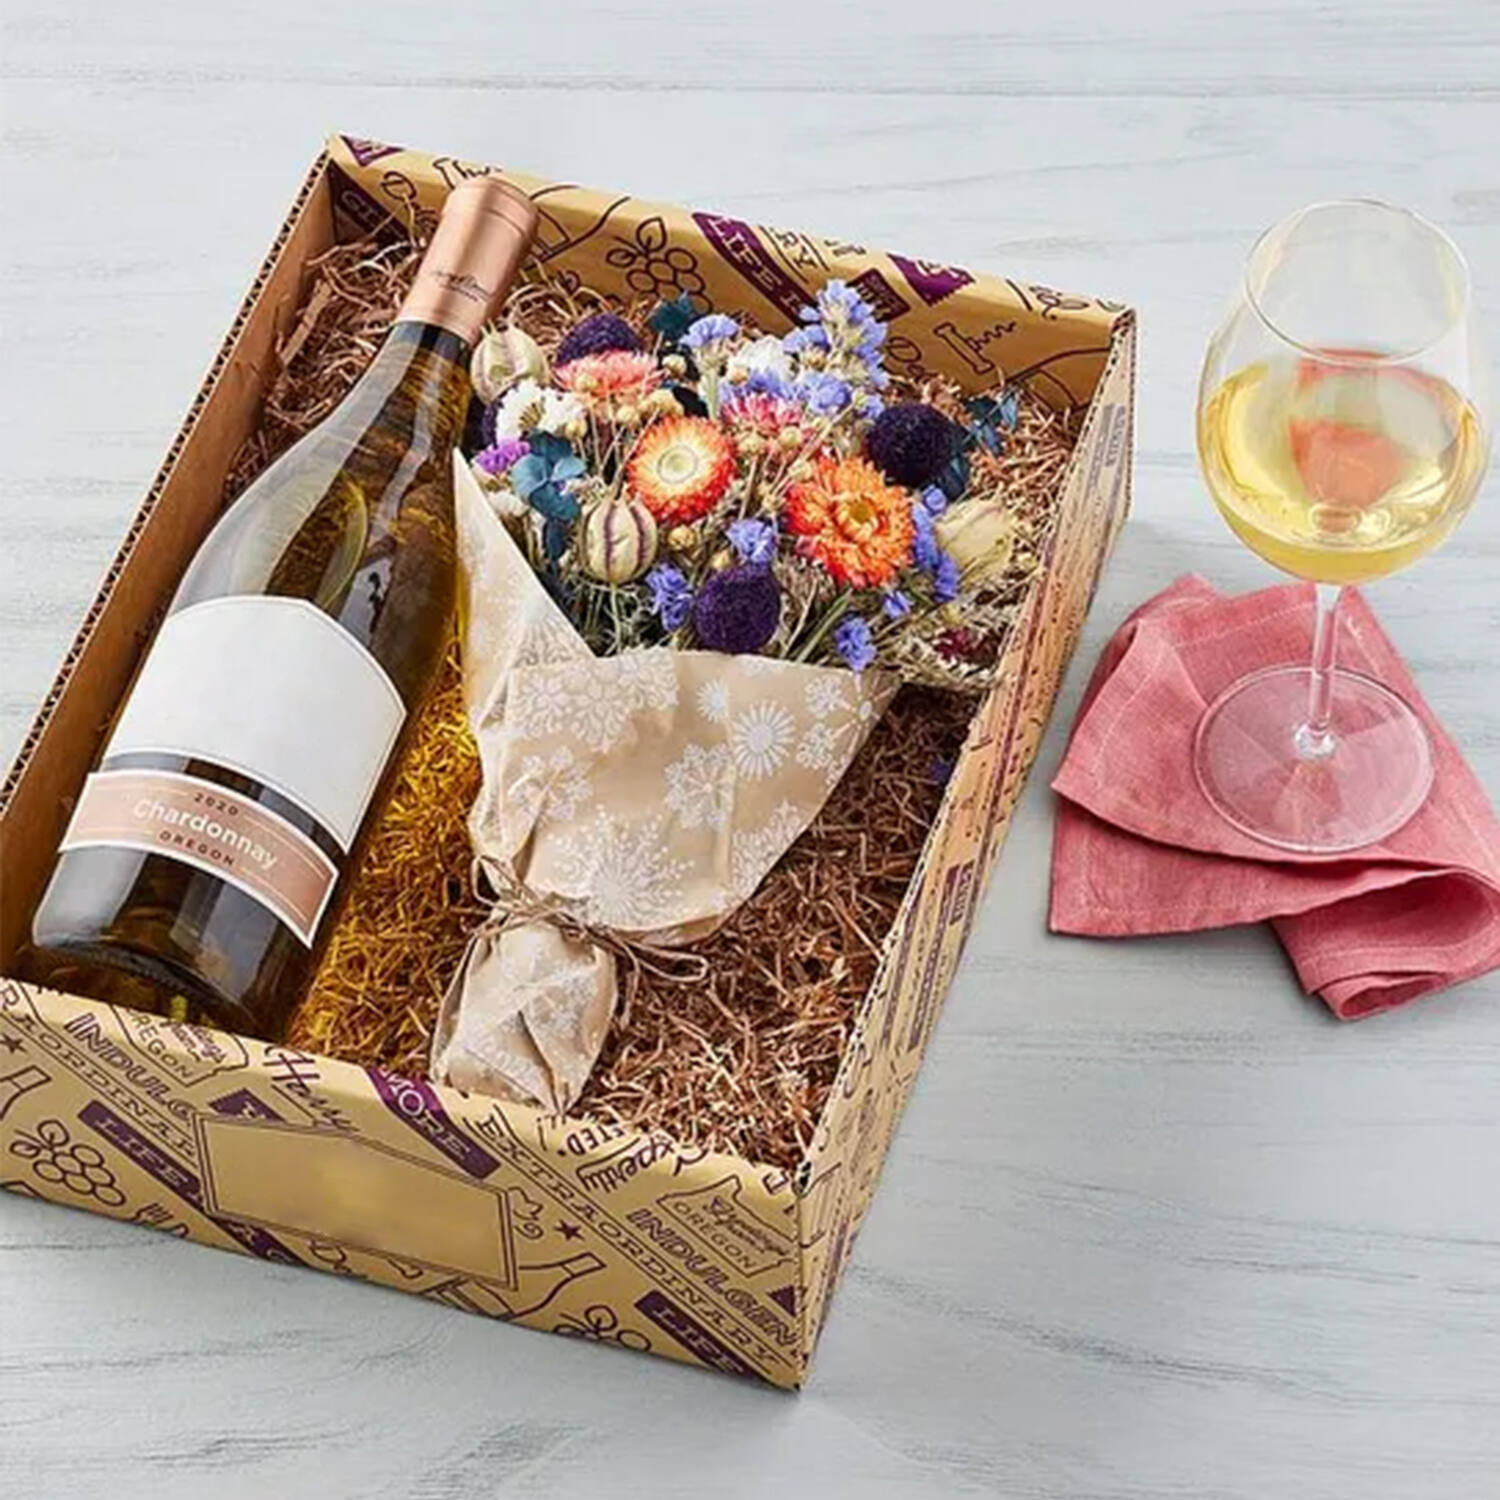 Leather Gift Basket,Magazine Newspaper Holder,Storage Organizer for Wine  Flowers Fruits Candys,for Holiday Presents Display - Walmart.com